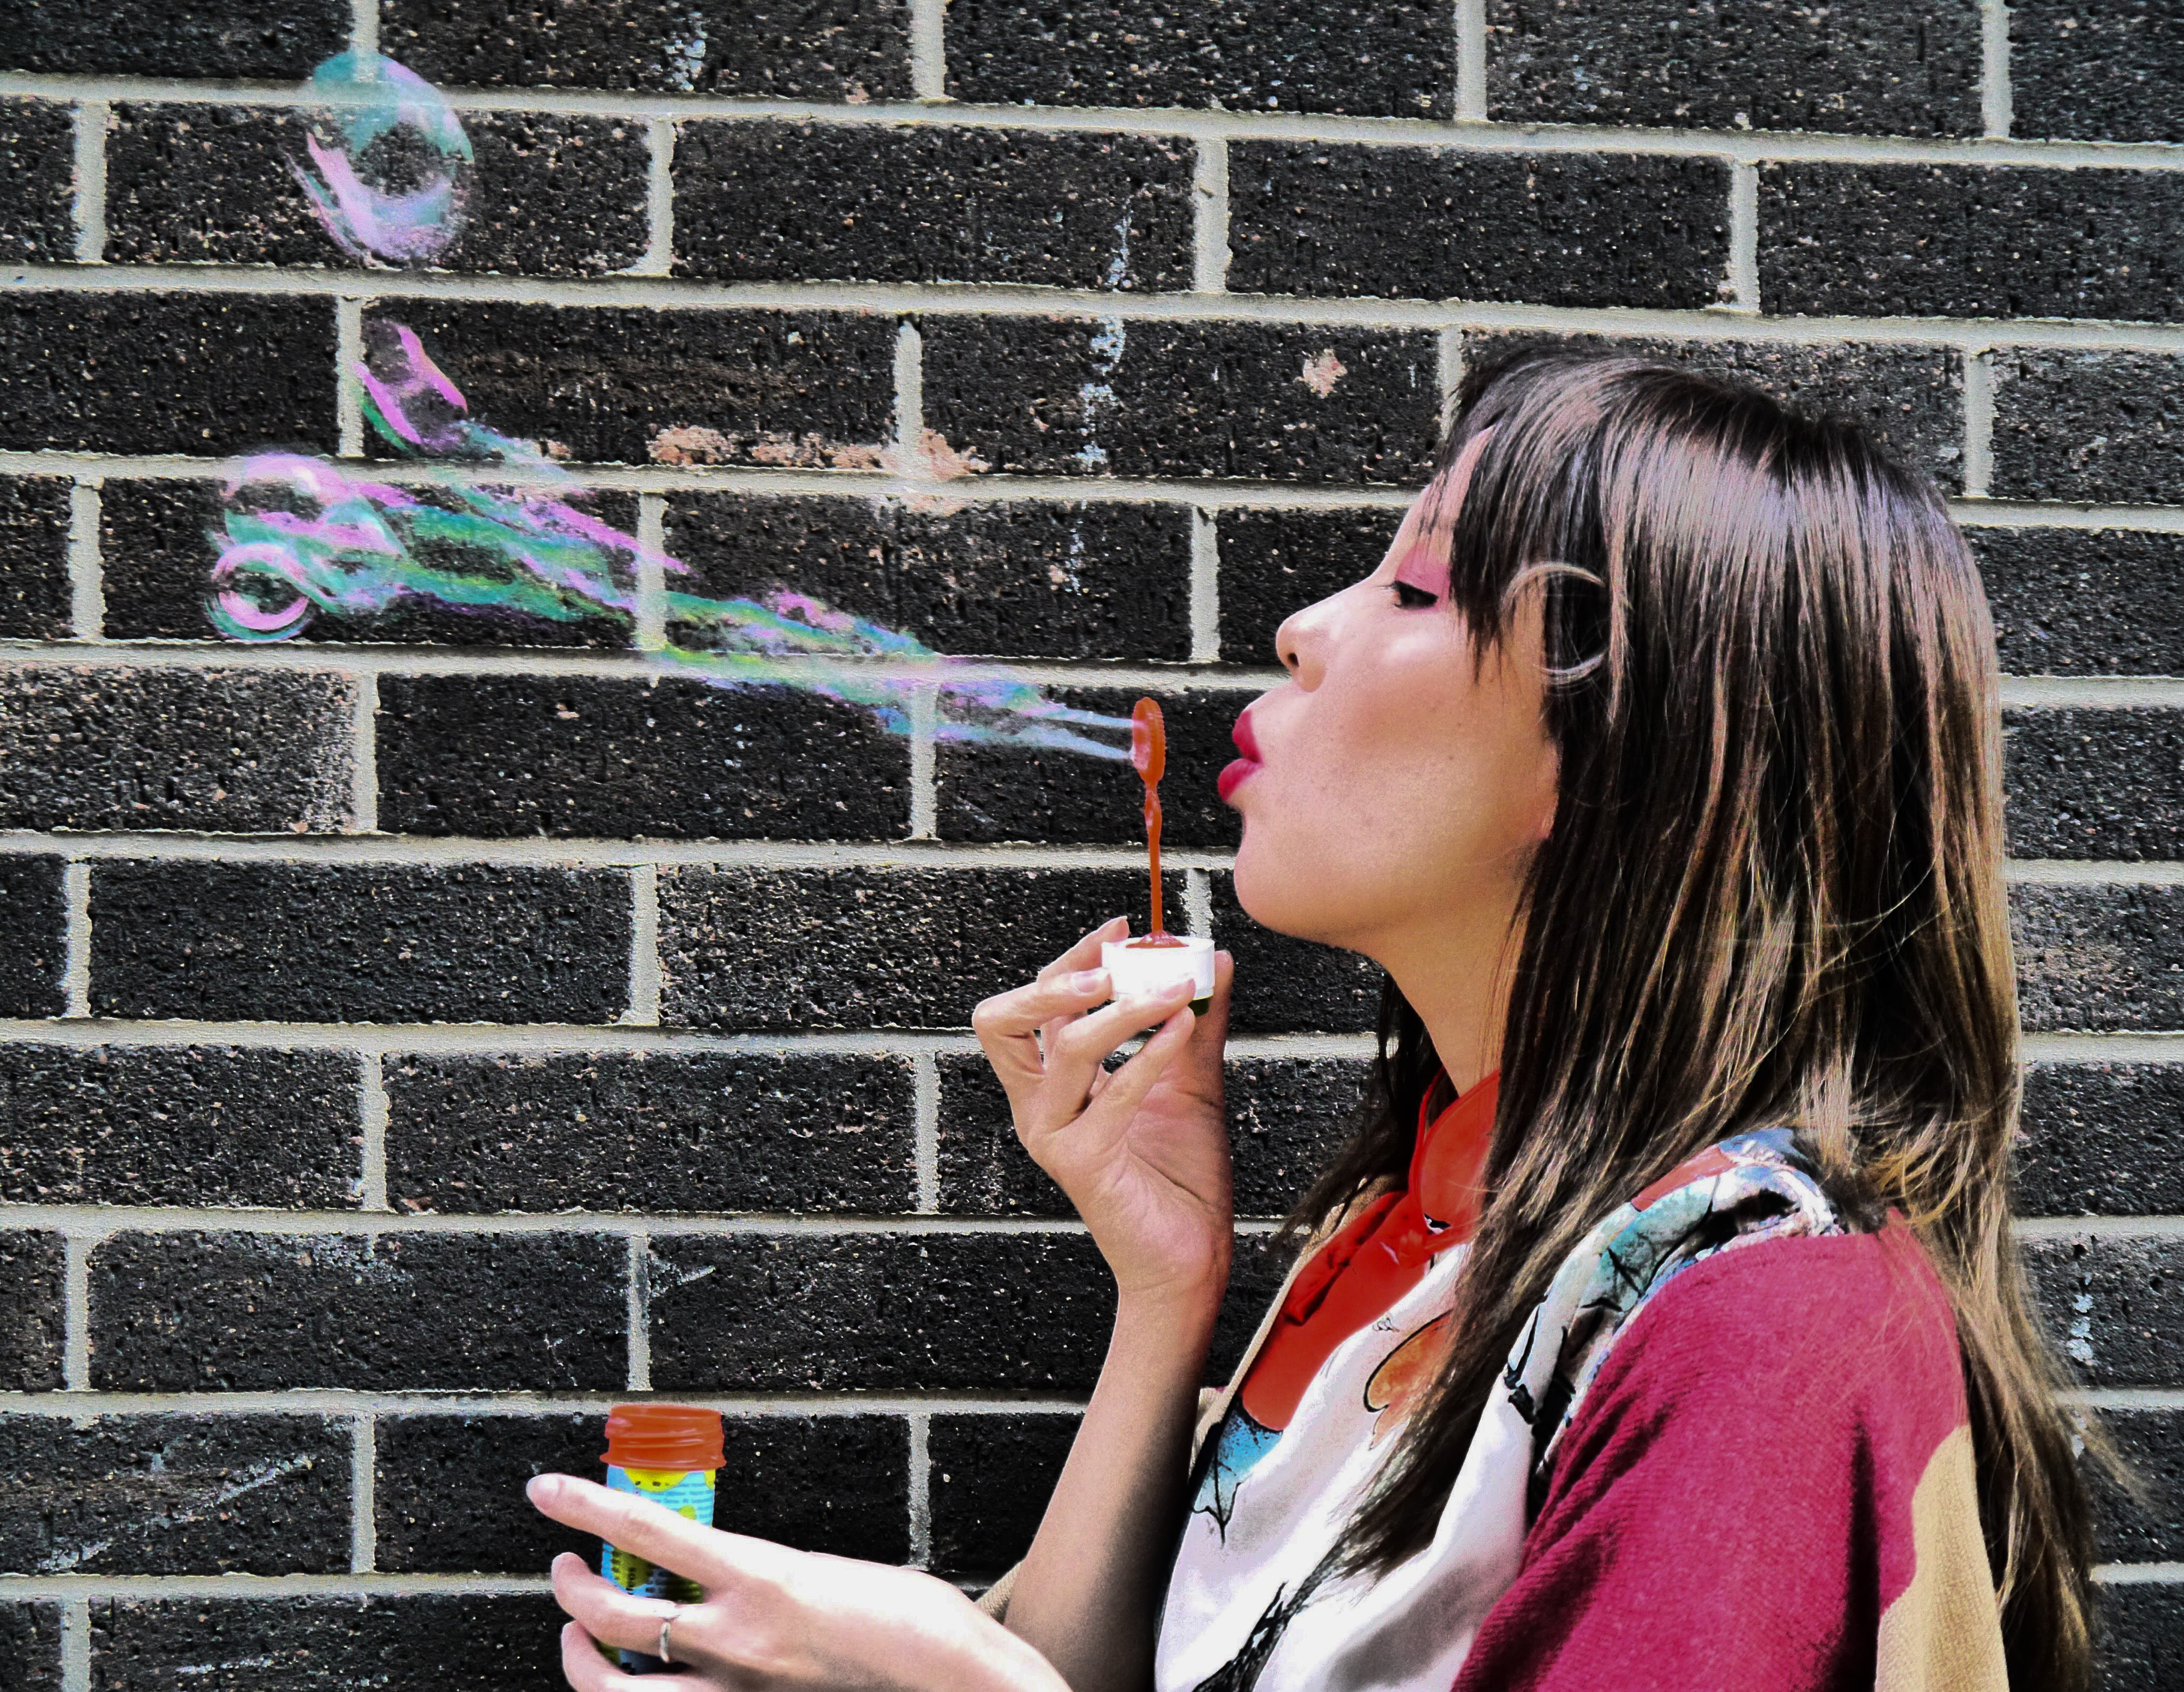 Photograph of woman blowing bubbles as an example of good Photographic exposure